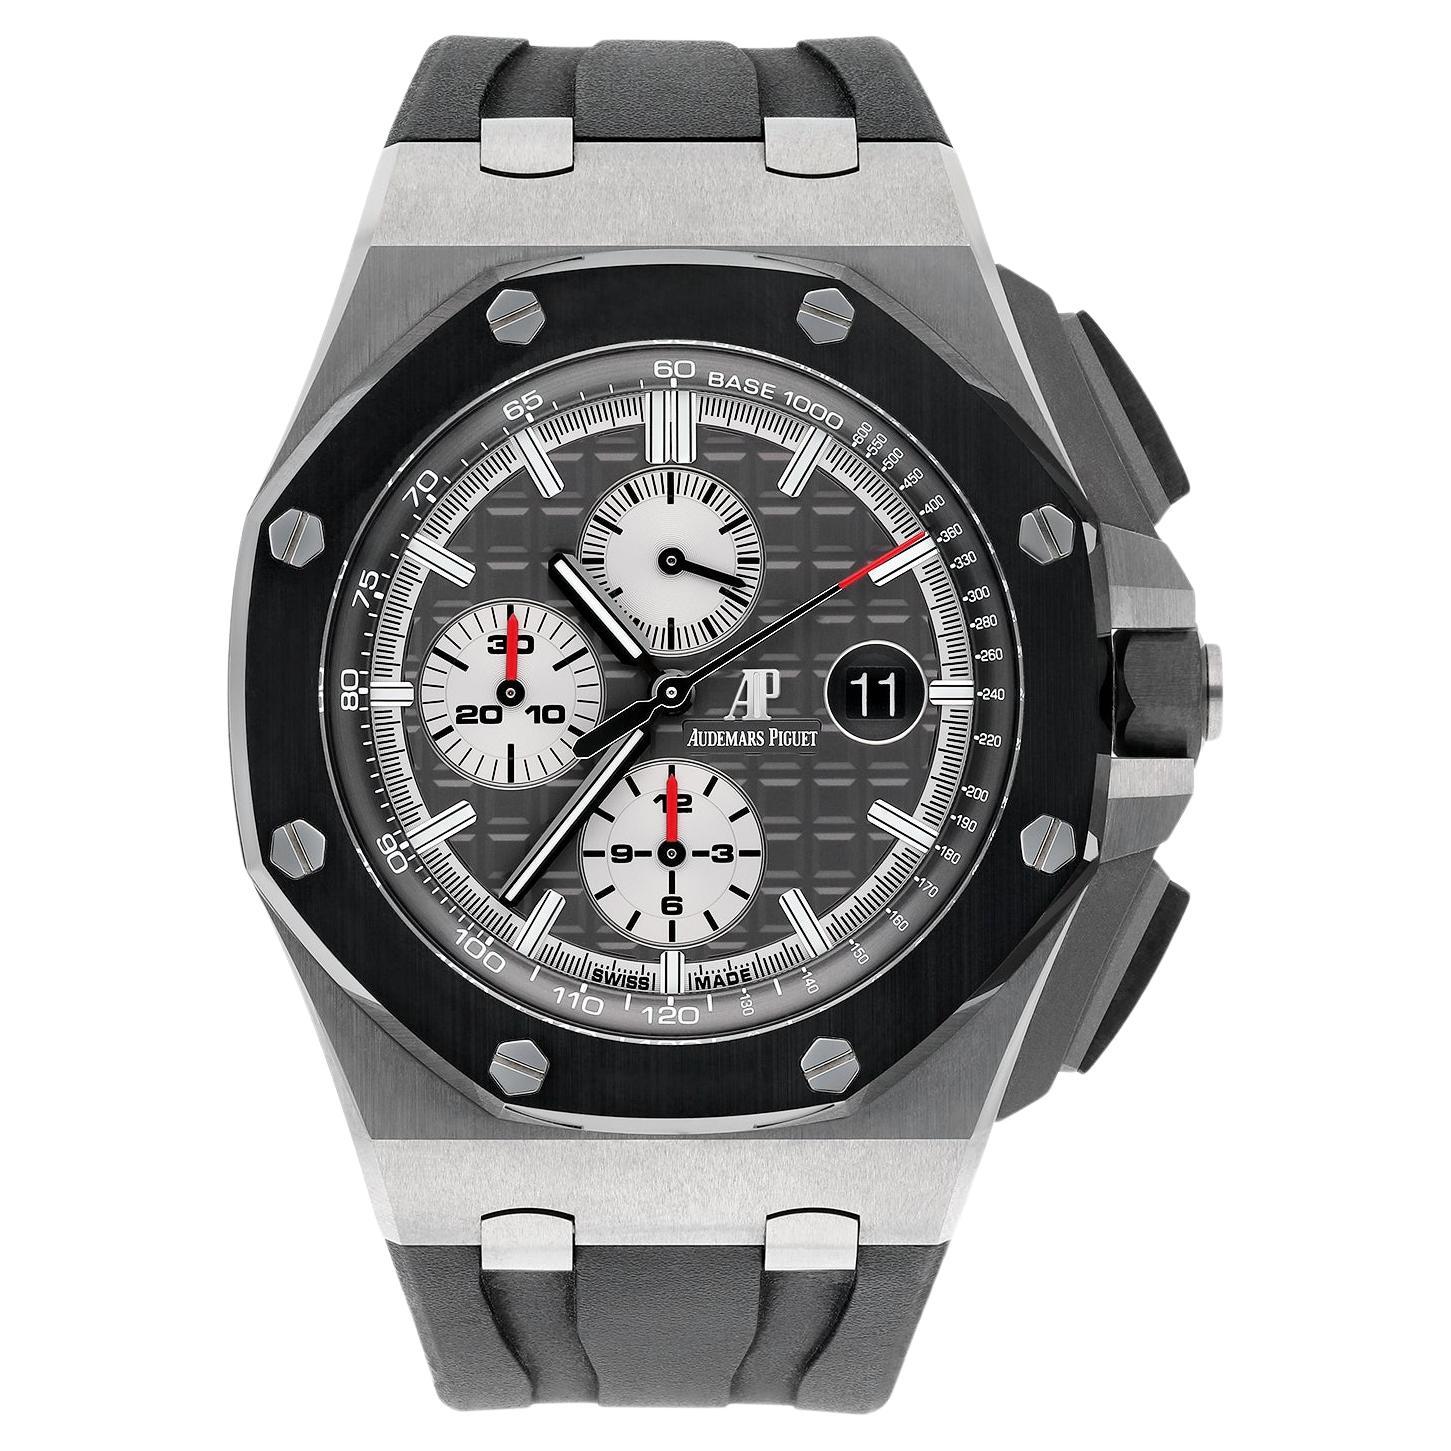 Introducing the Audemars Piguet Royal Oak Offshore Ceramic Anthracite 44mm Men's Watch 26405CE.OO.A002CA.01 – a brand new timepiece with a striking and contemporary design. Crafted with precision, this watch features a ceramic case that houses a